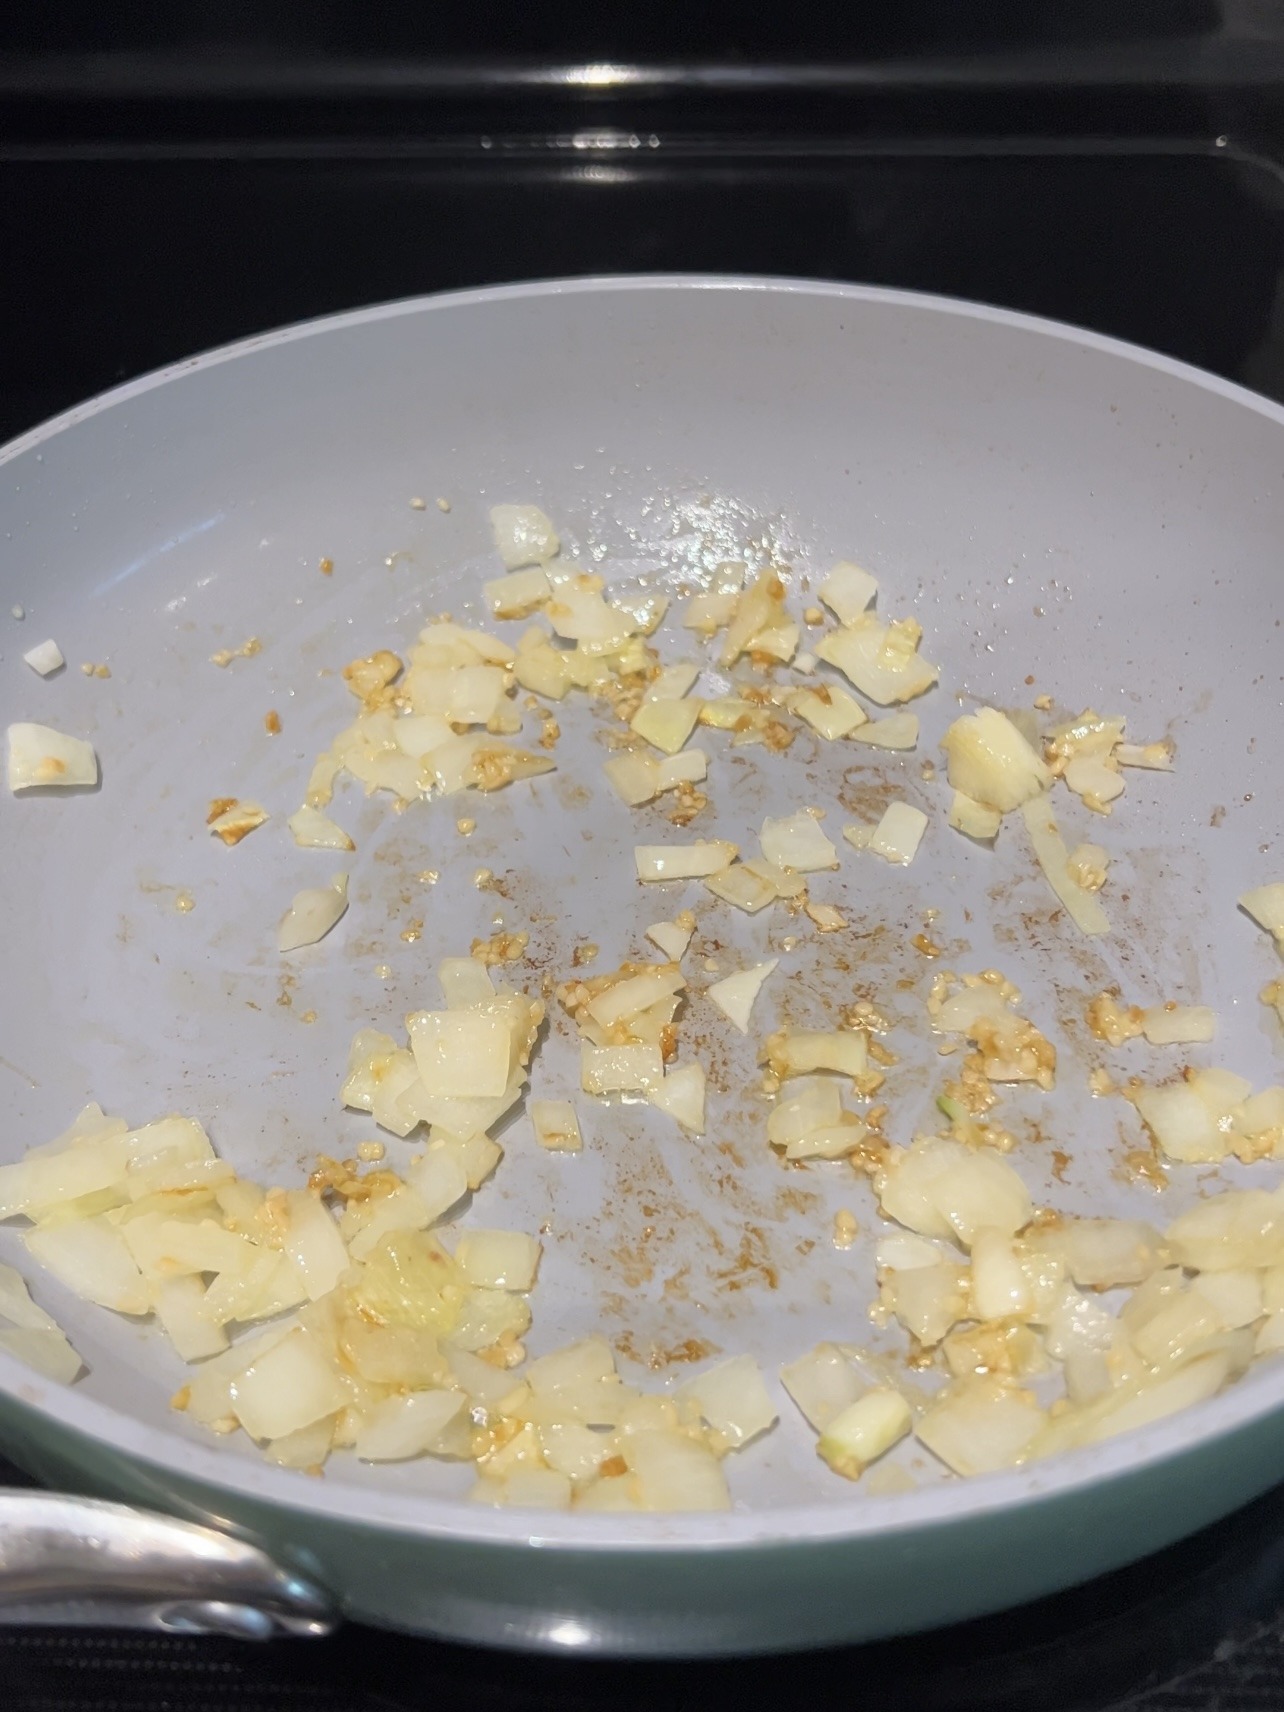 Step 1: Bring a medium skillet with olive oil to medium heat. Add the onions and cook, stirring, for 2 minutes or until they are fragrant. Then, add the garlic and cook for another 2 minutes.